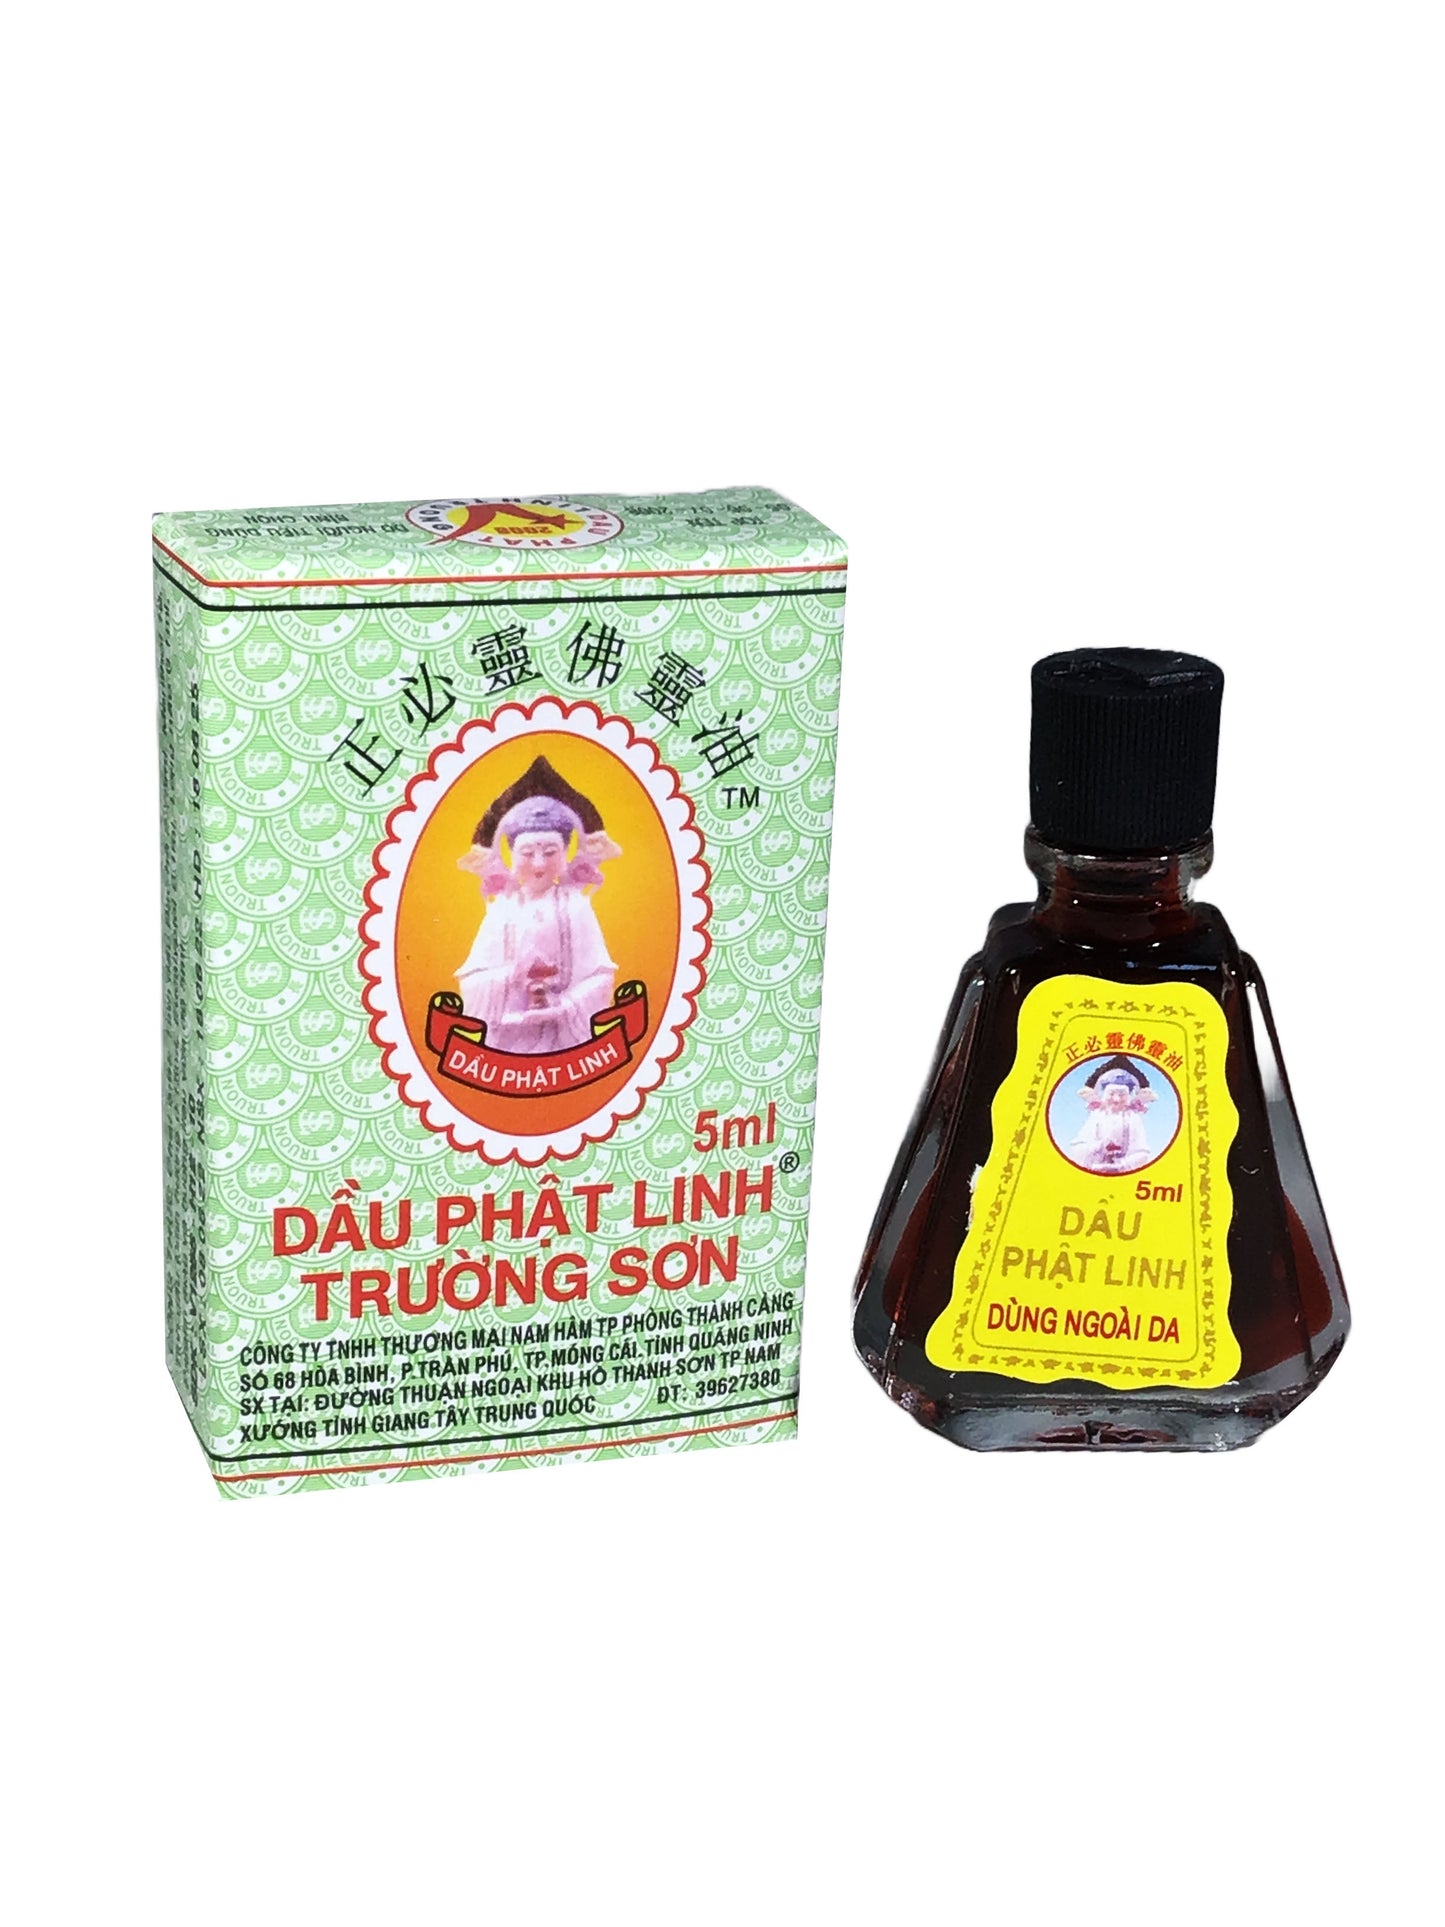 Dau Phat Linh-Truong Son Medicated Oil 正必灵佛灵油